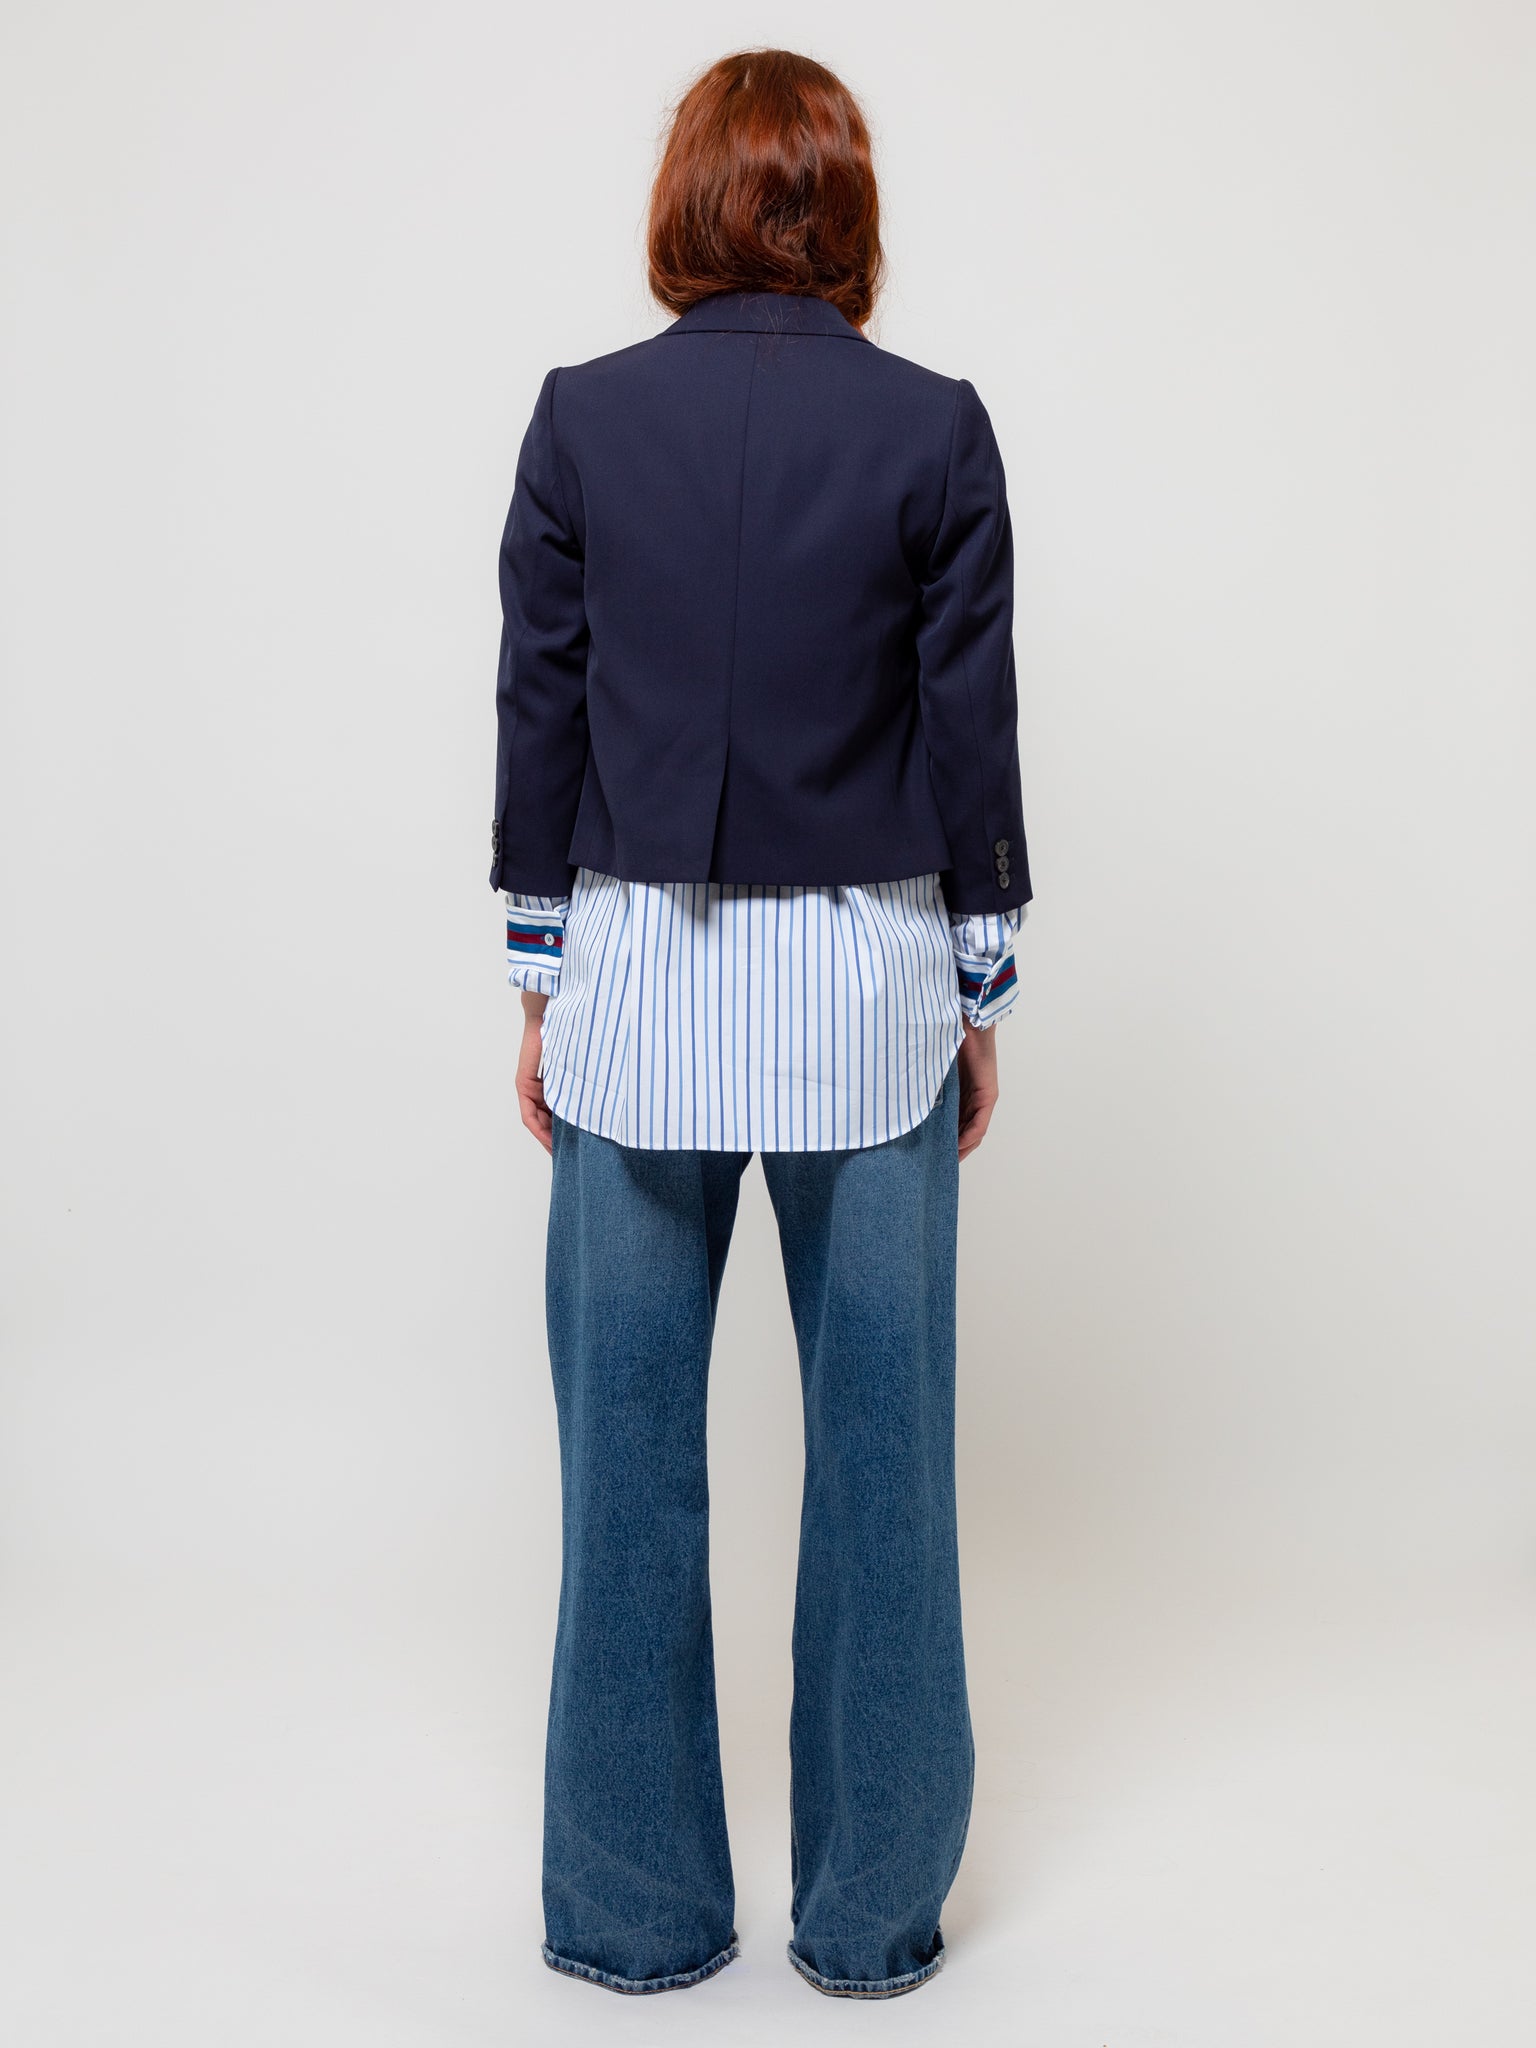 Bambis Cropped Jacket Navy